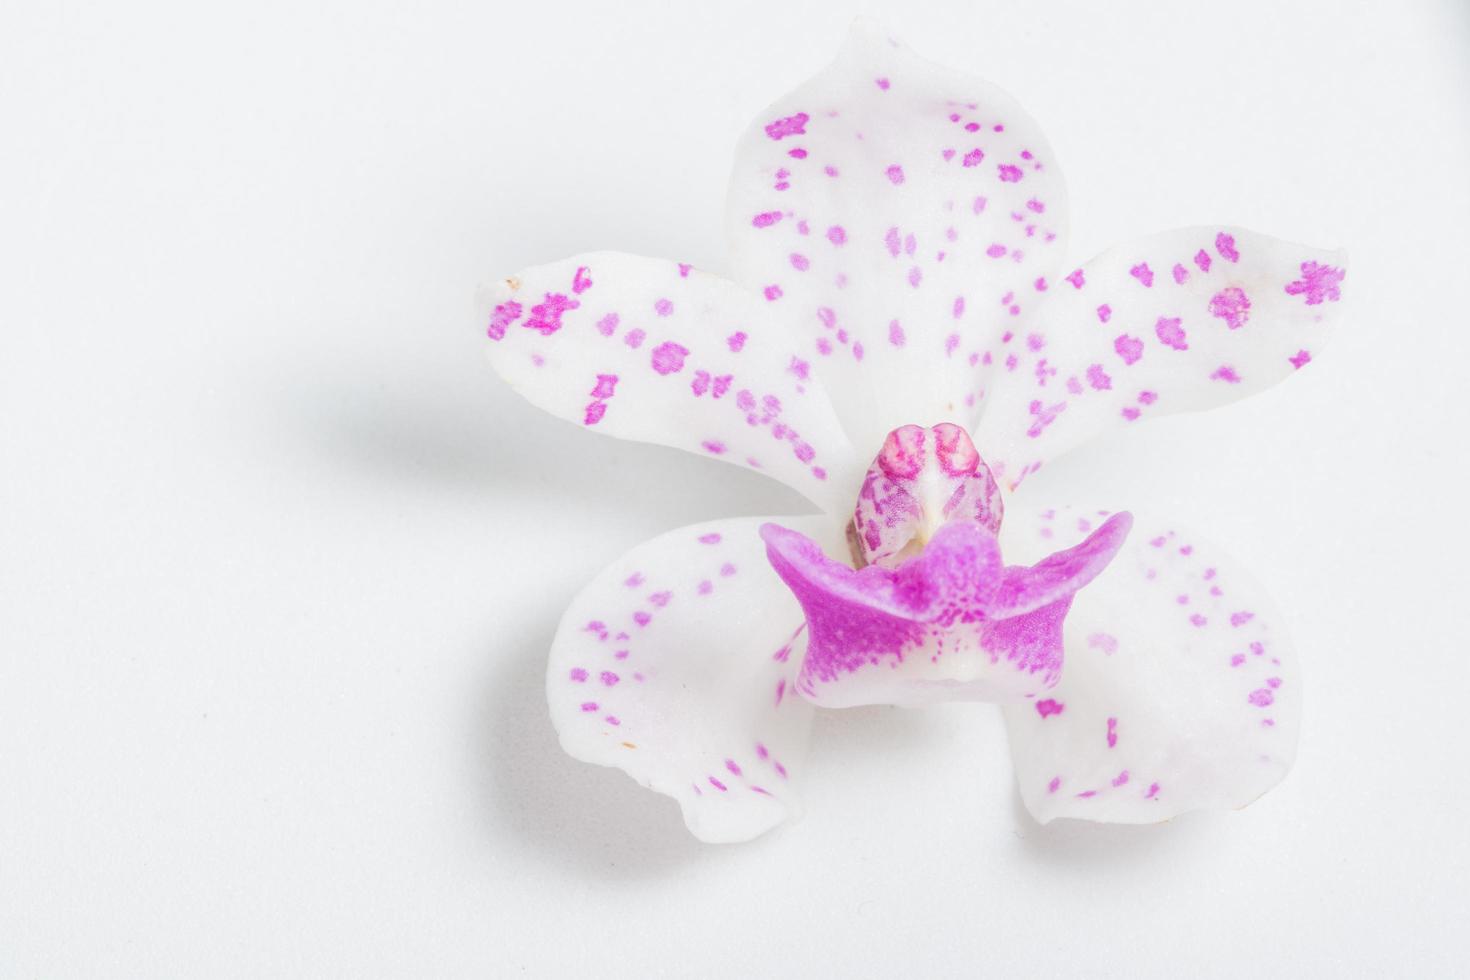 Orchid flower on white background photo